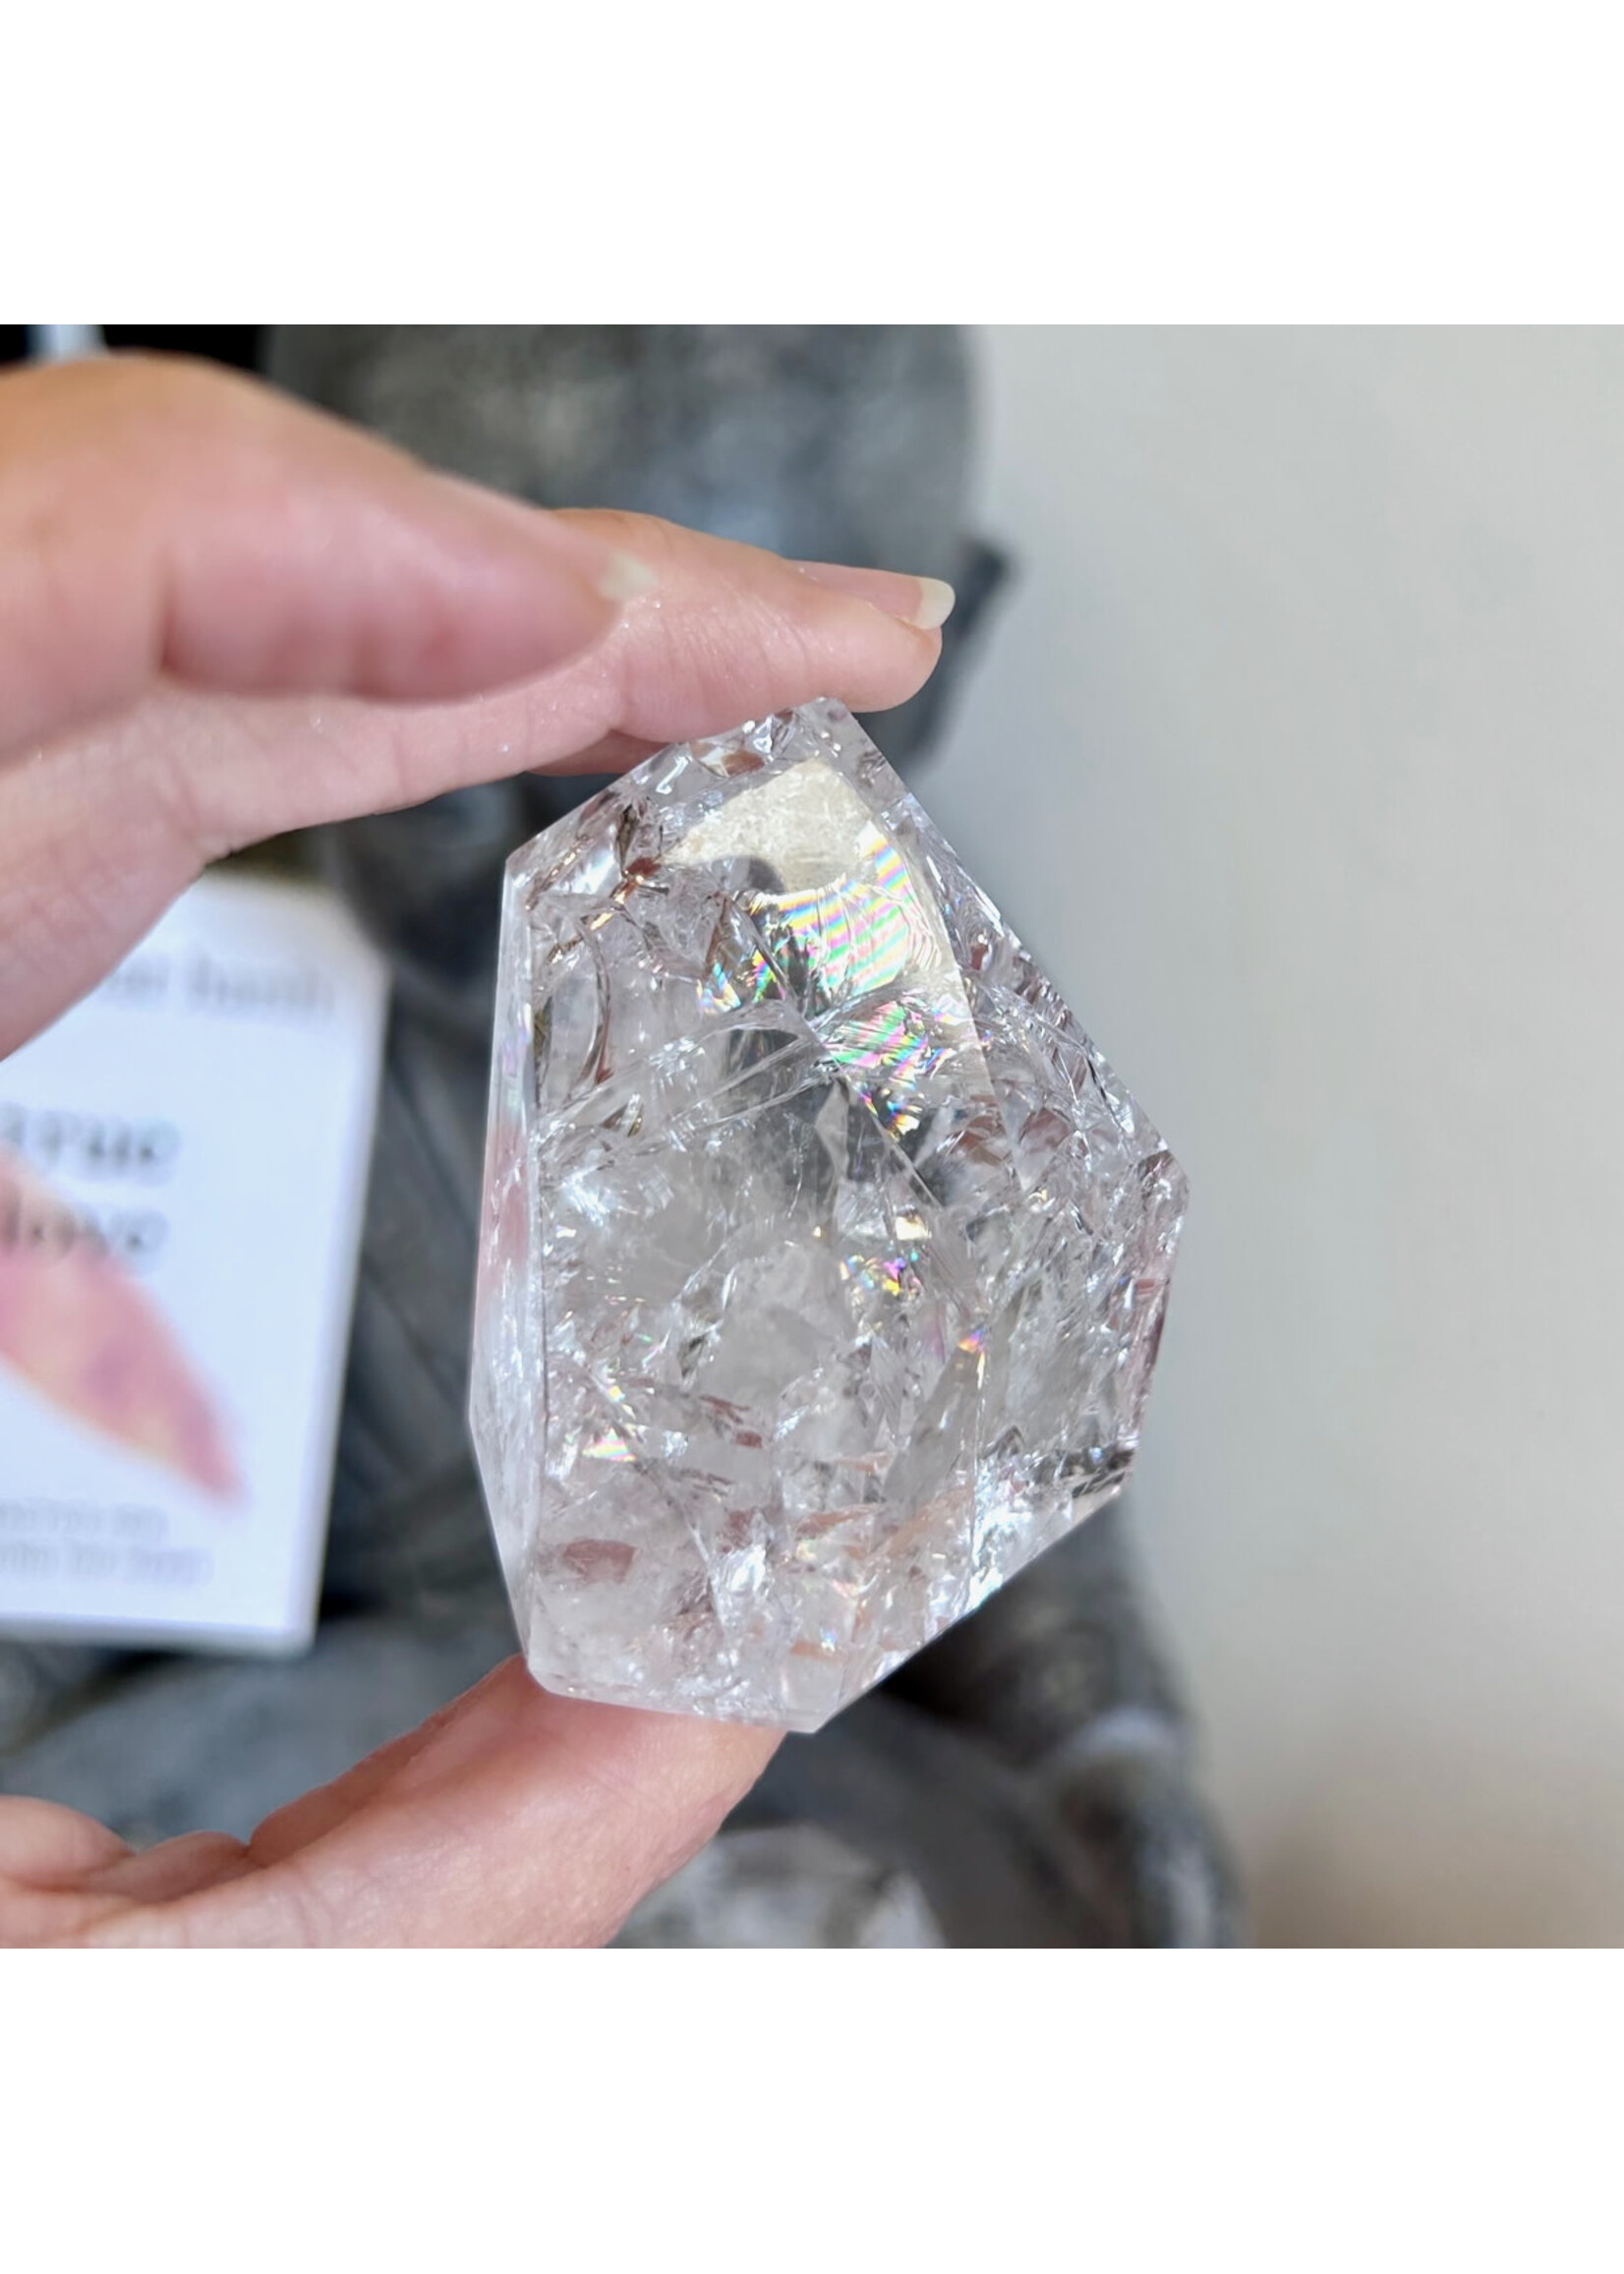 Fire and Ice Quartz Generators for firing up your energy